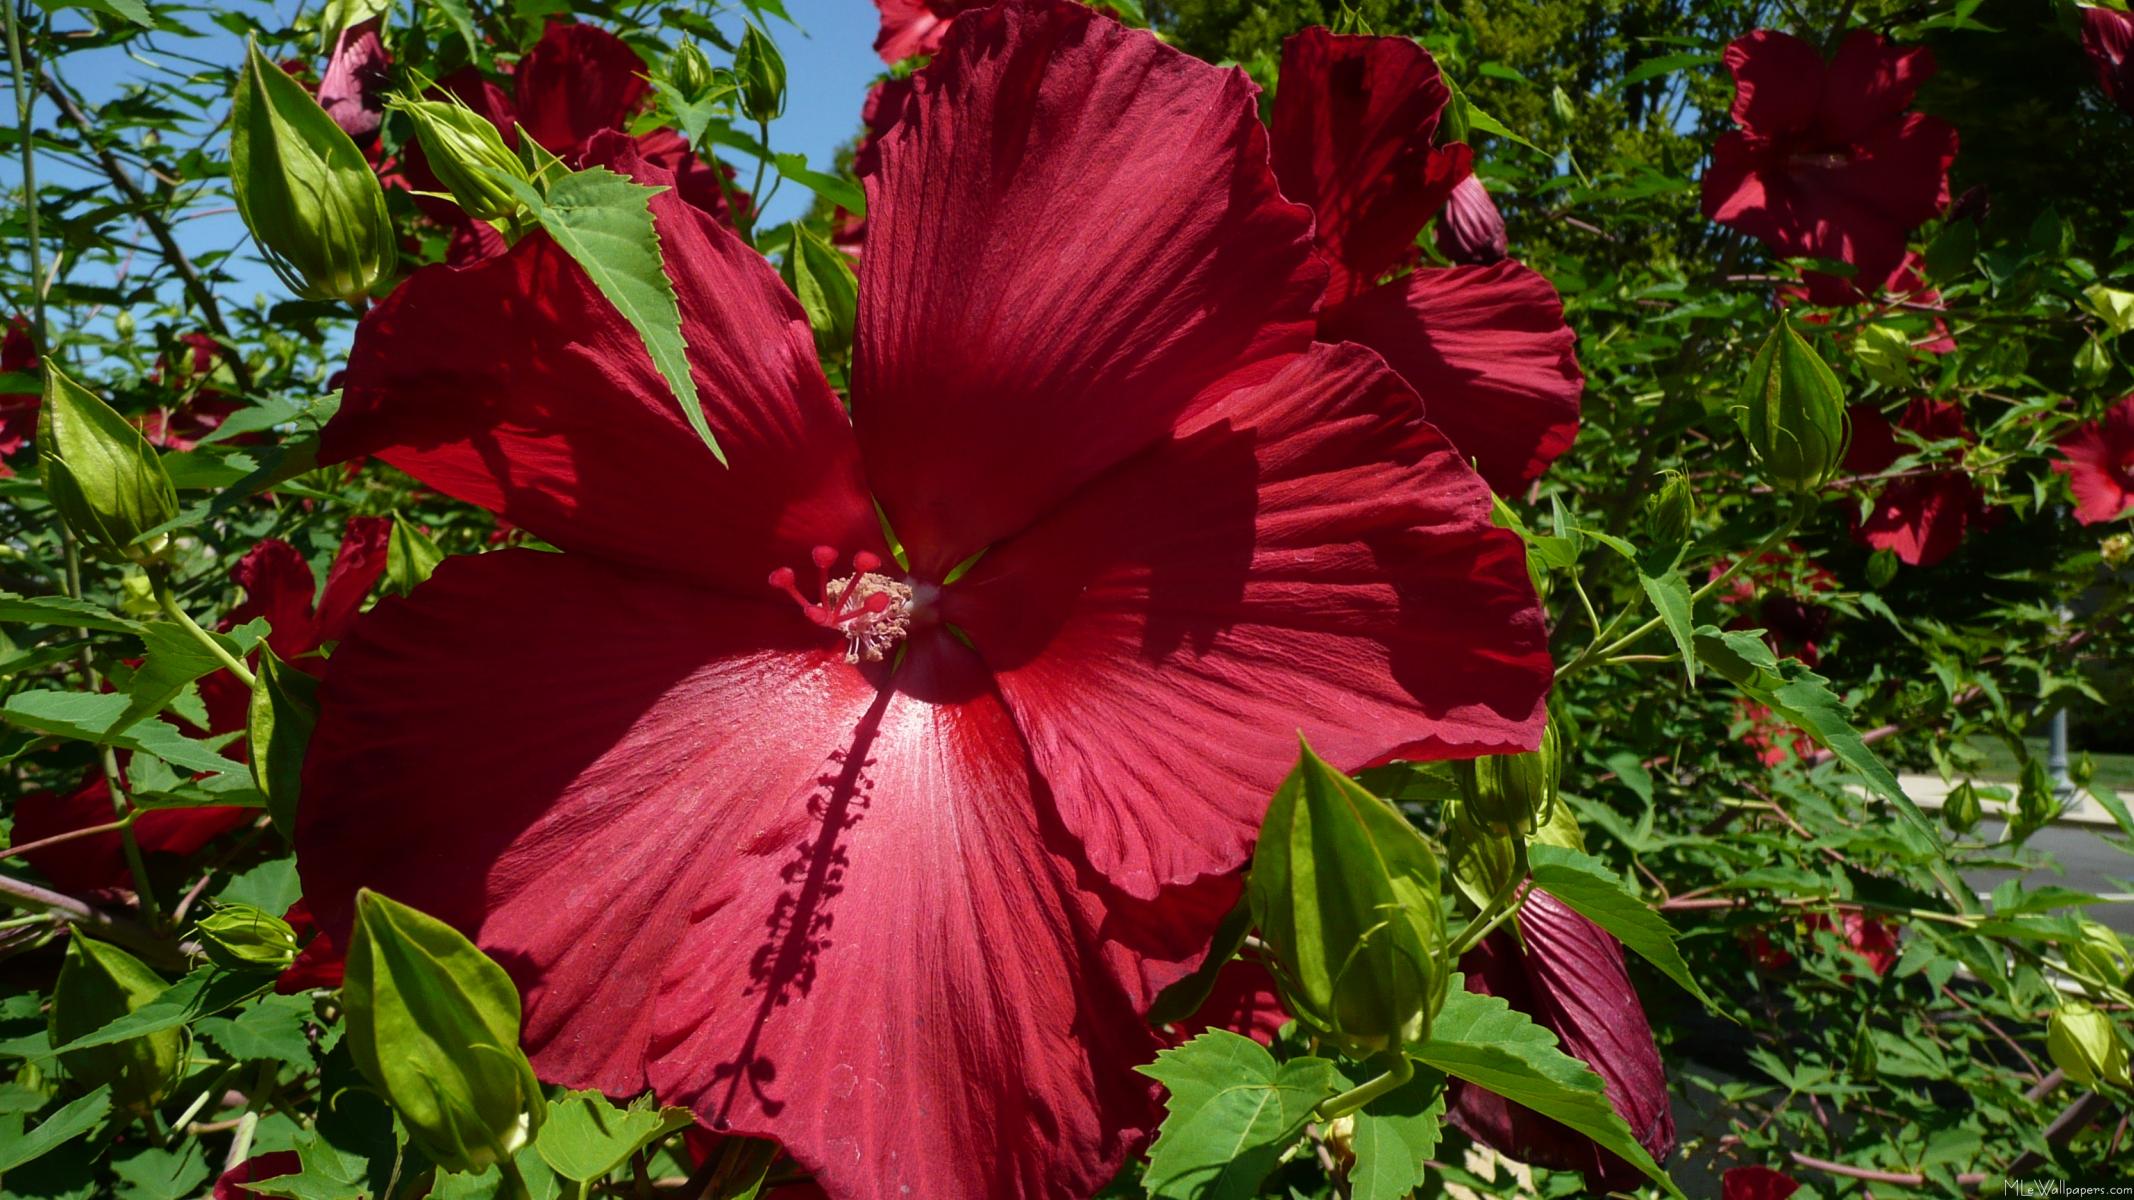 Here's a cheerful widescreen wallpaper with blue sky and bright hibiscus 